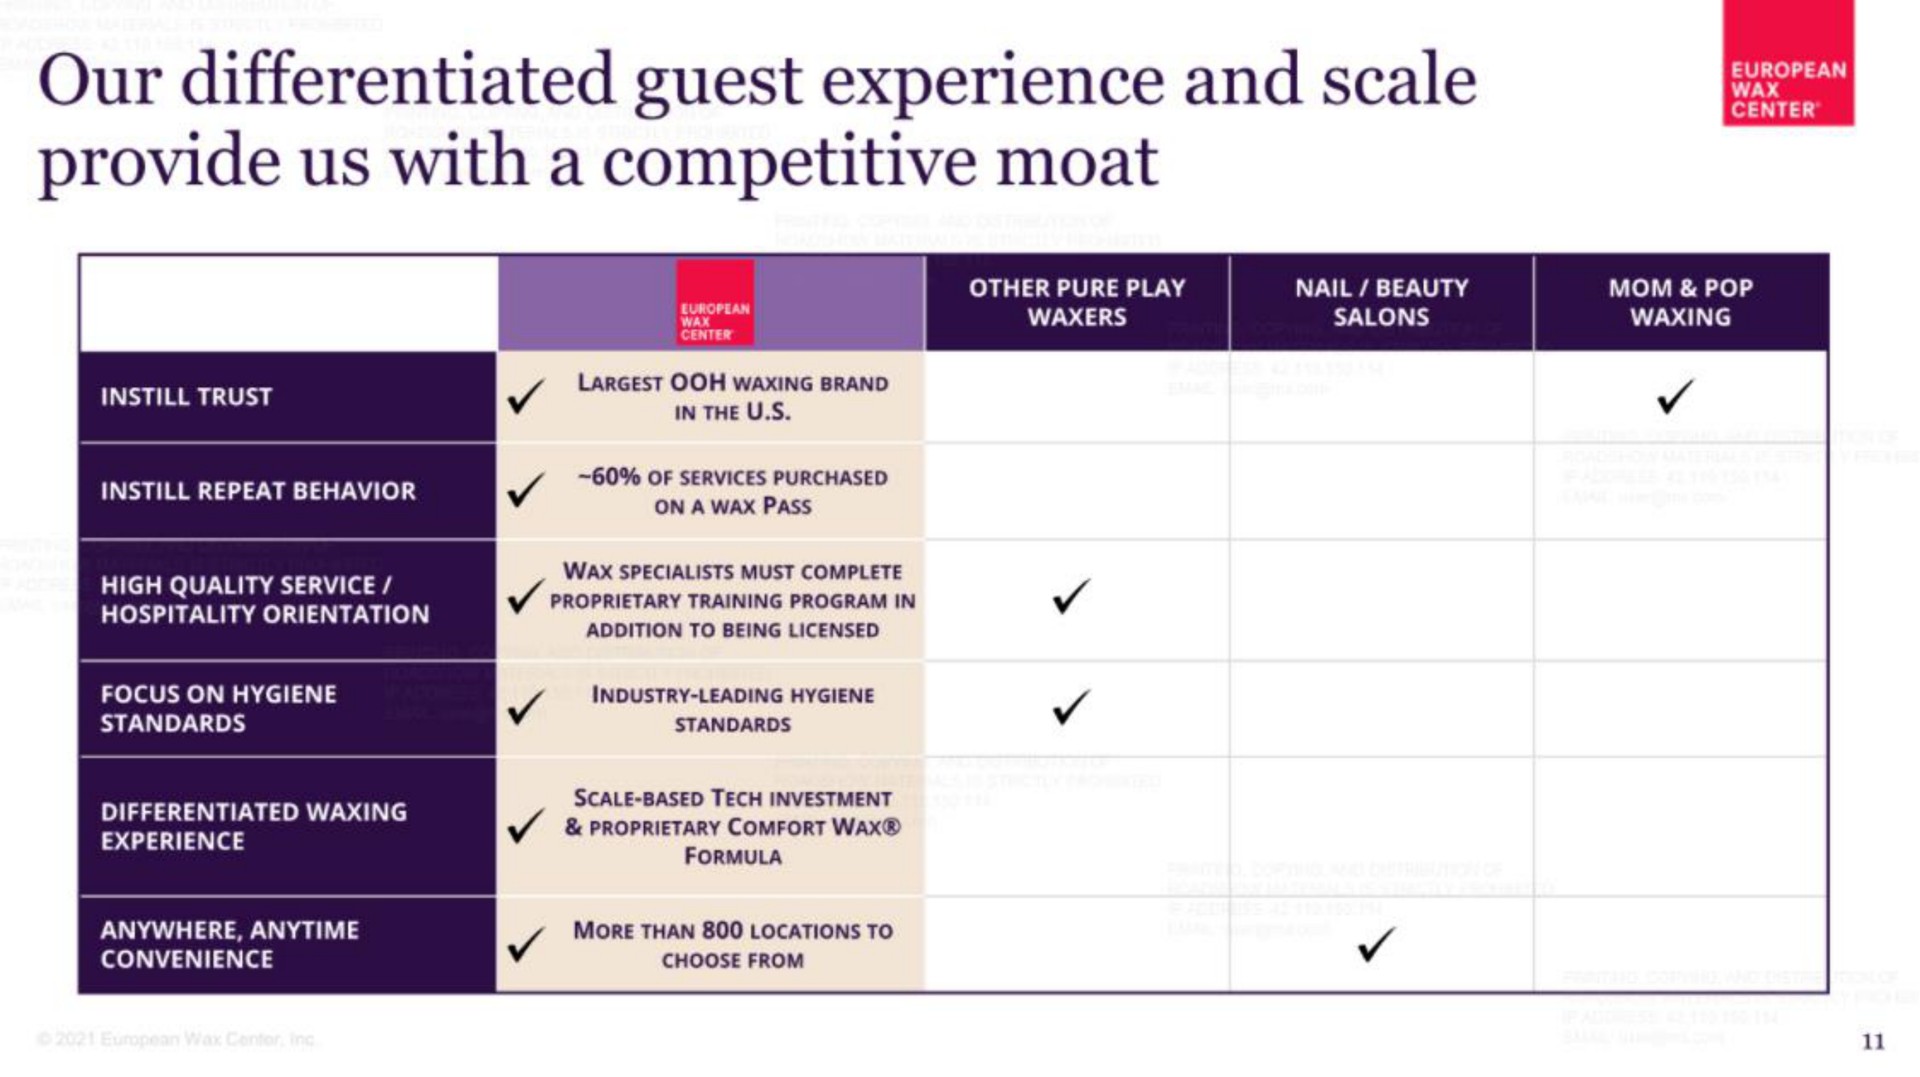 our differentiated guest experience and scale provide us with a competitive moat | European Wax Center